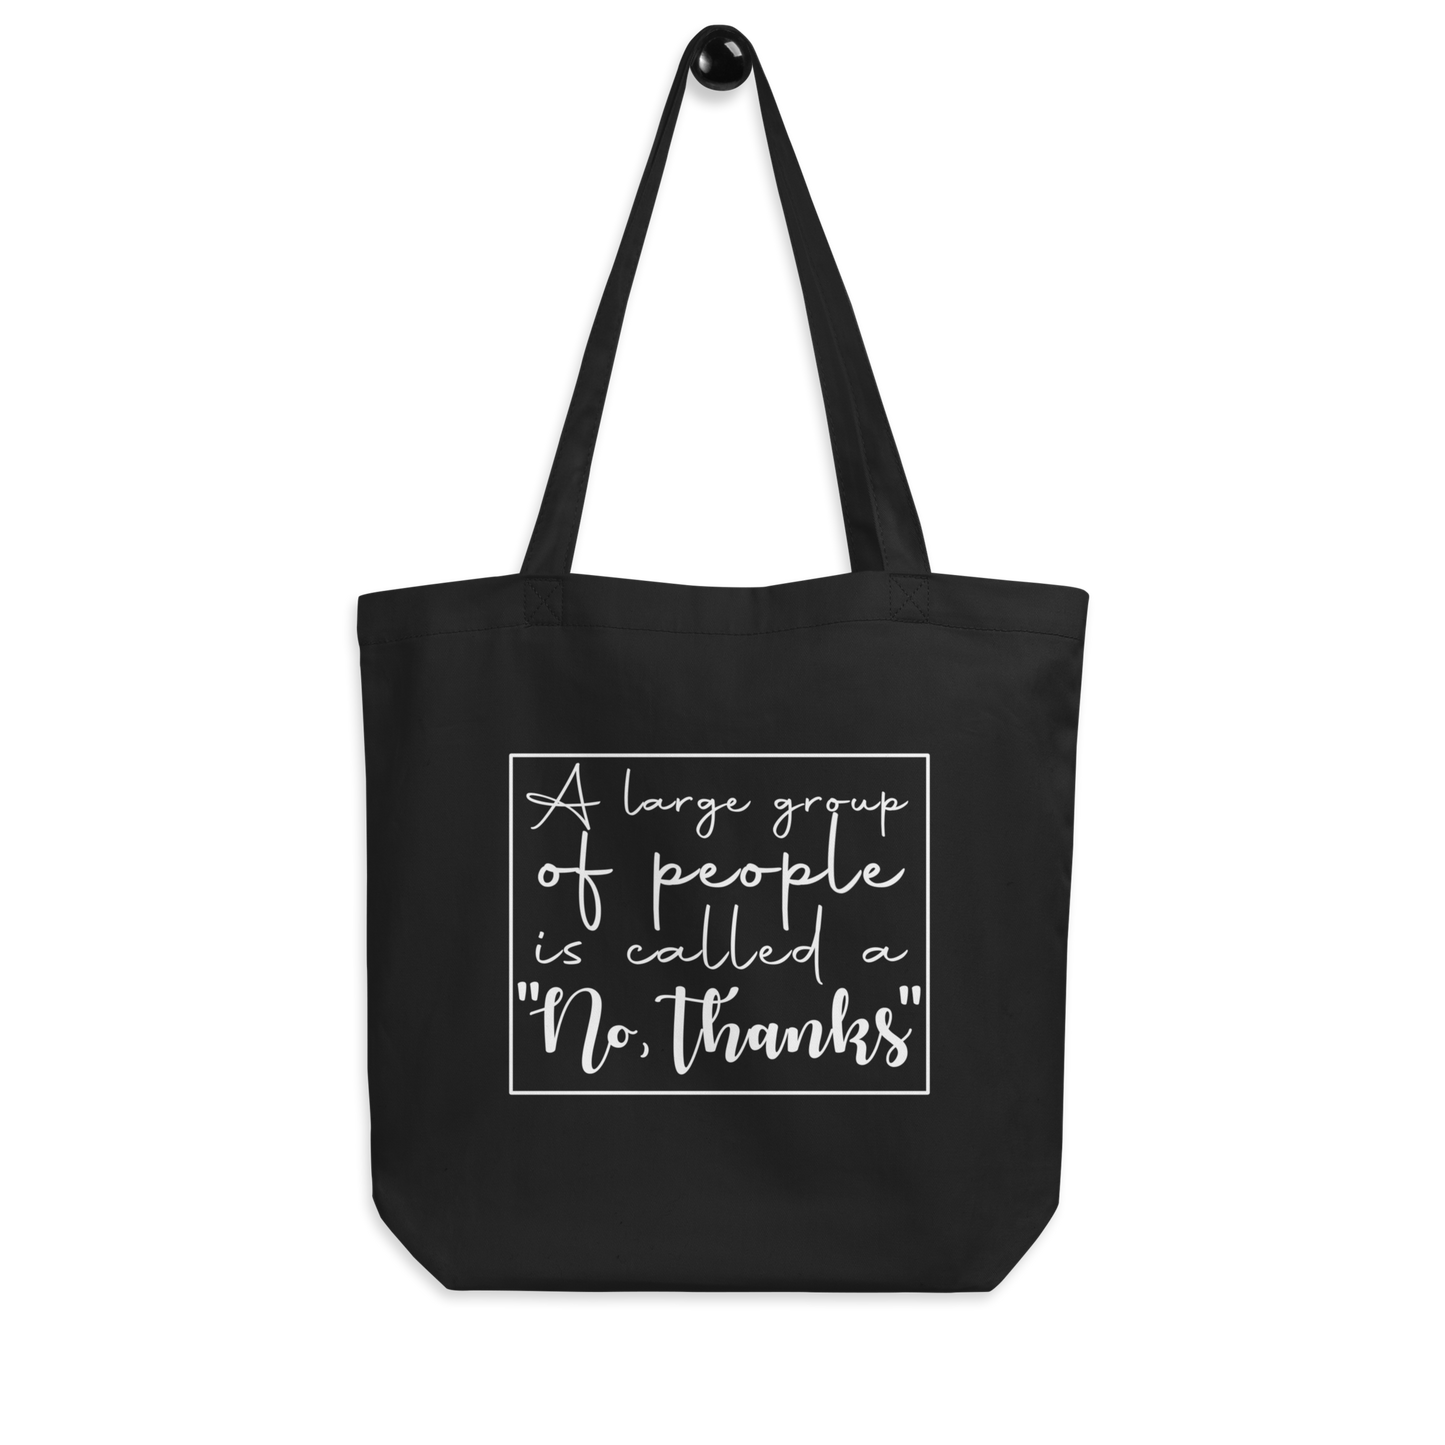 A Large Group of People is Called a "no, thanks" Tote